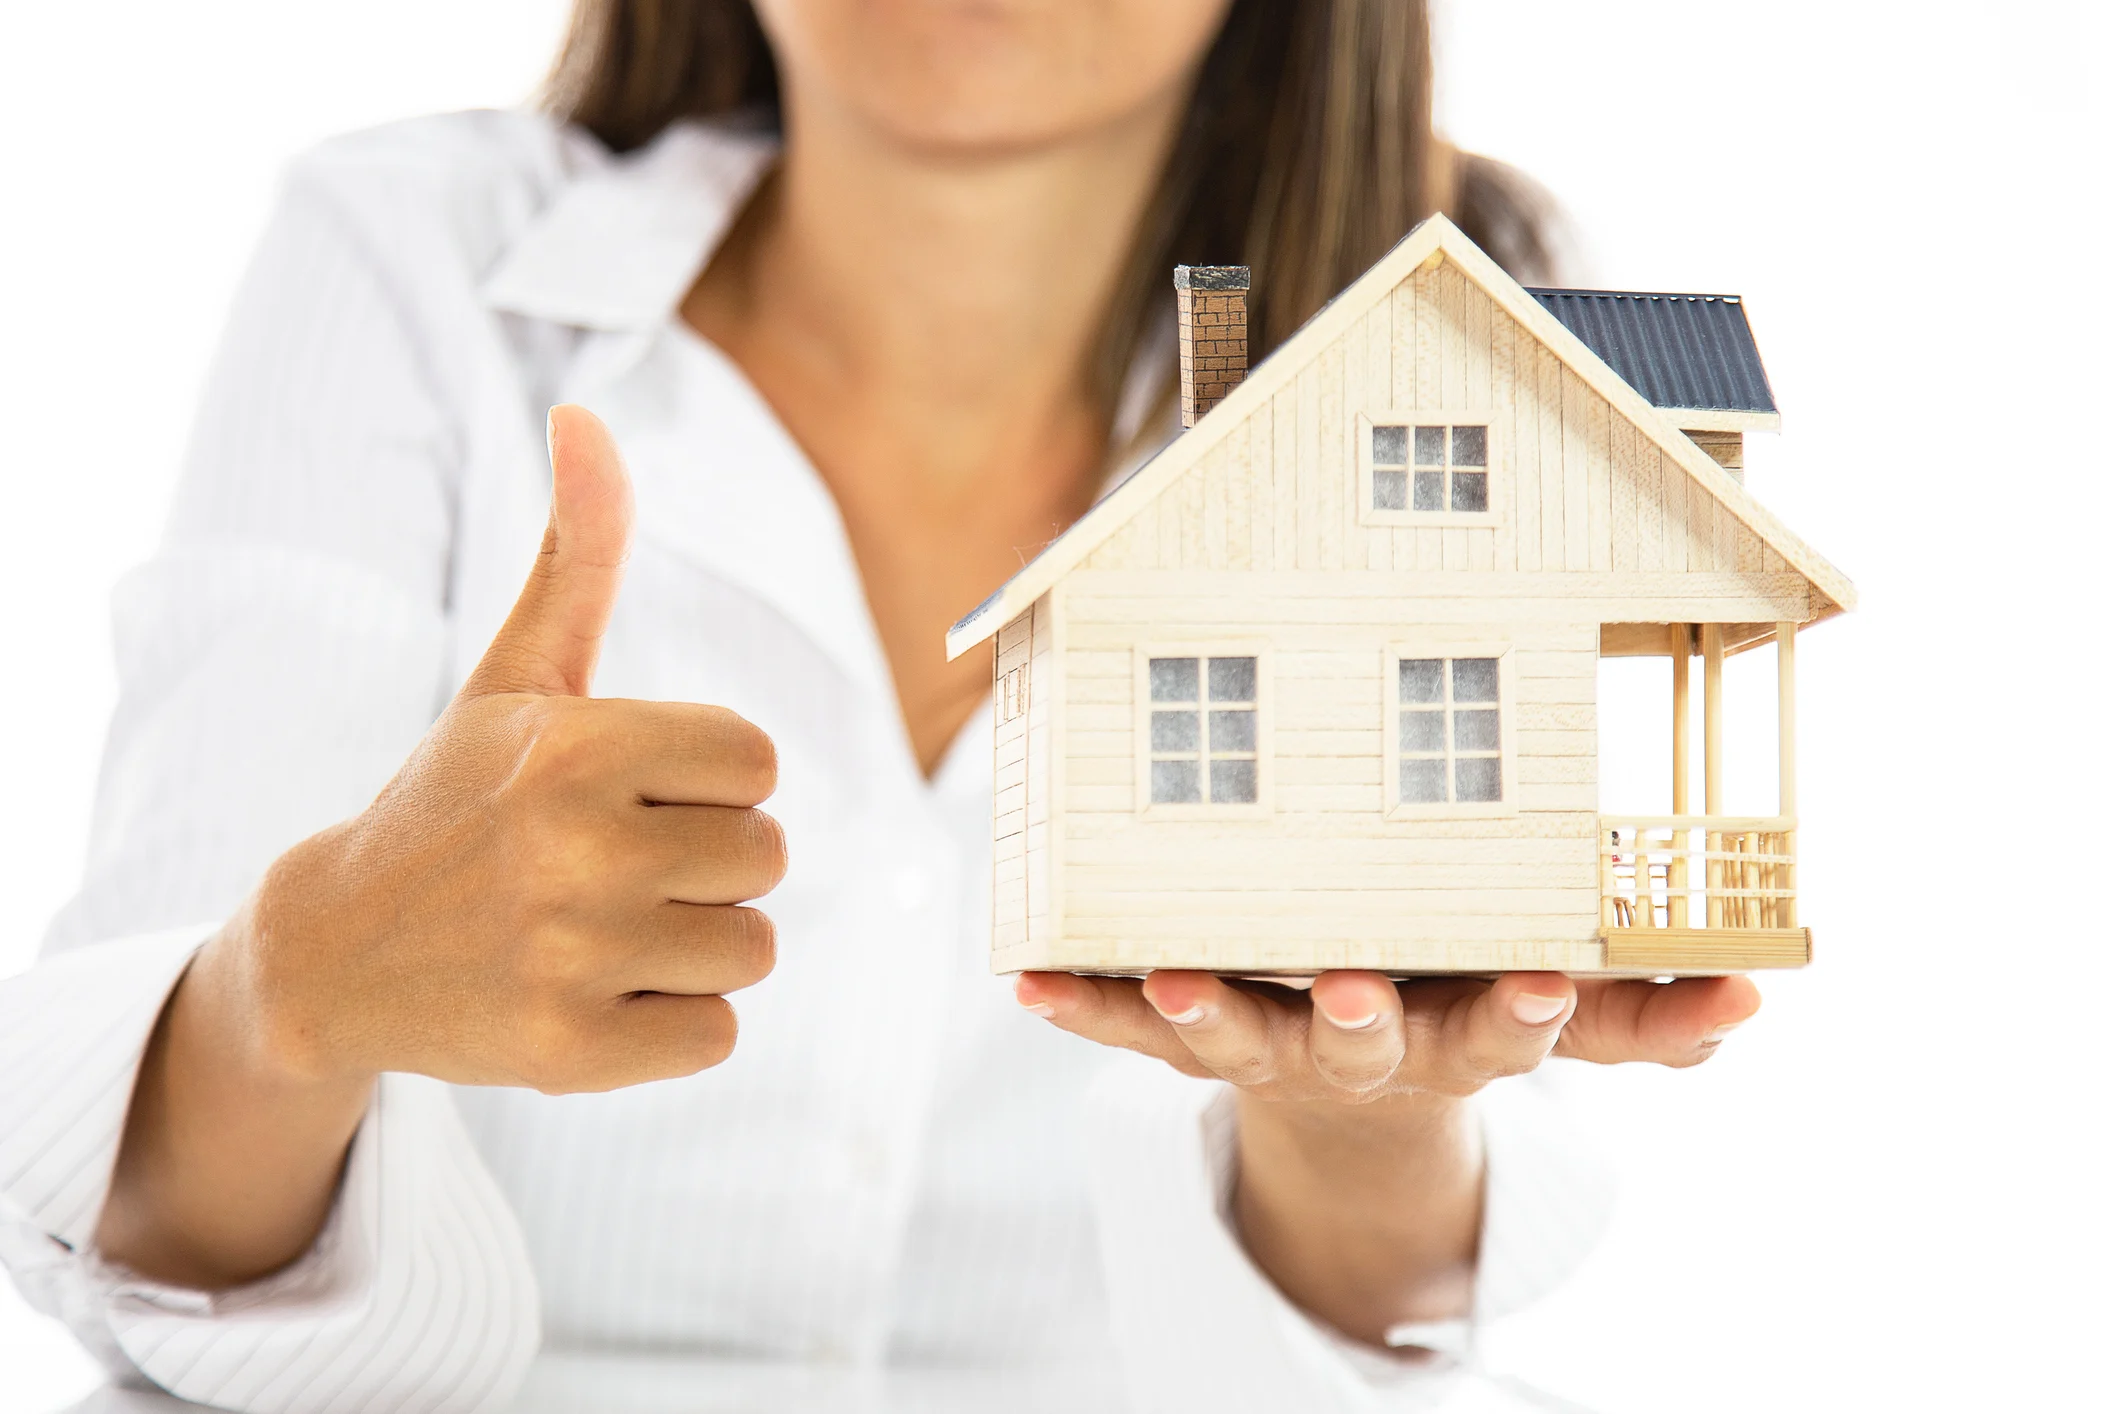 Finding the Right Homeowners Insurance Policy